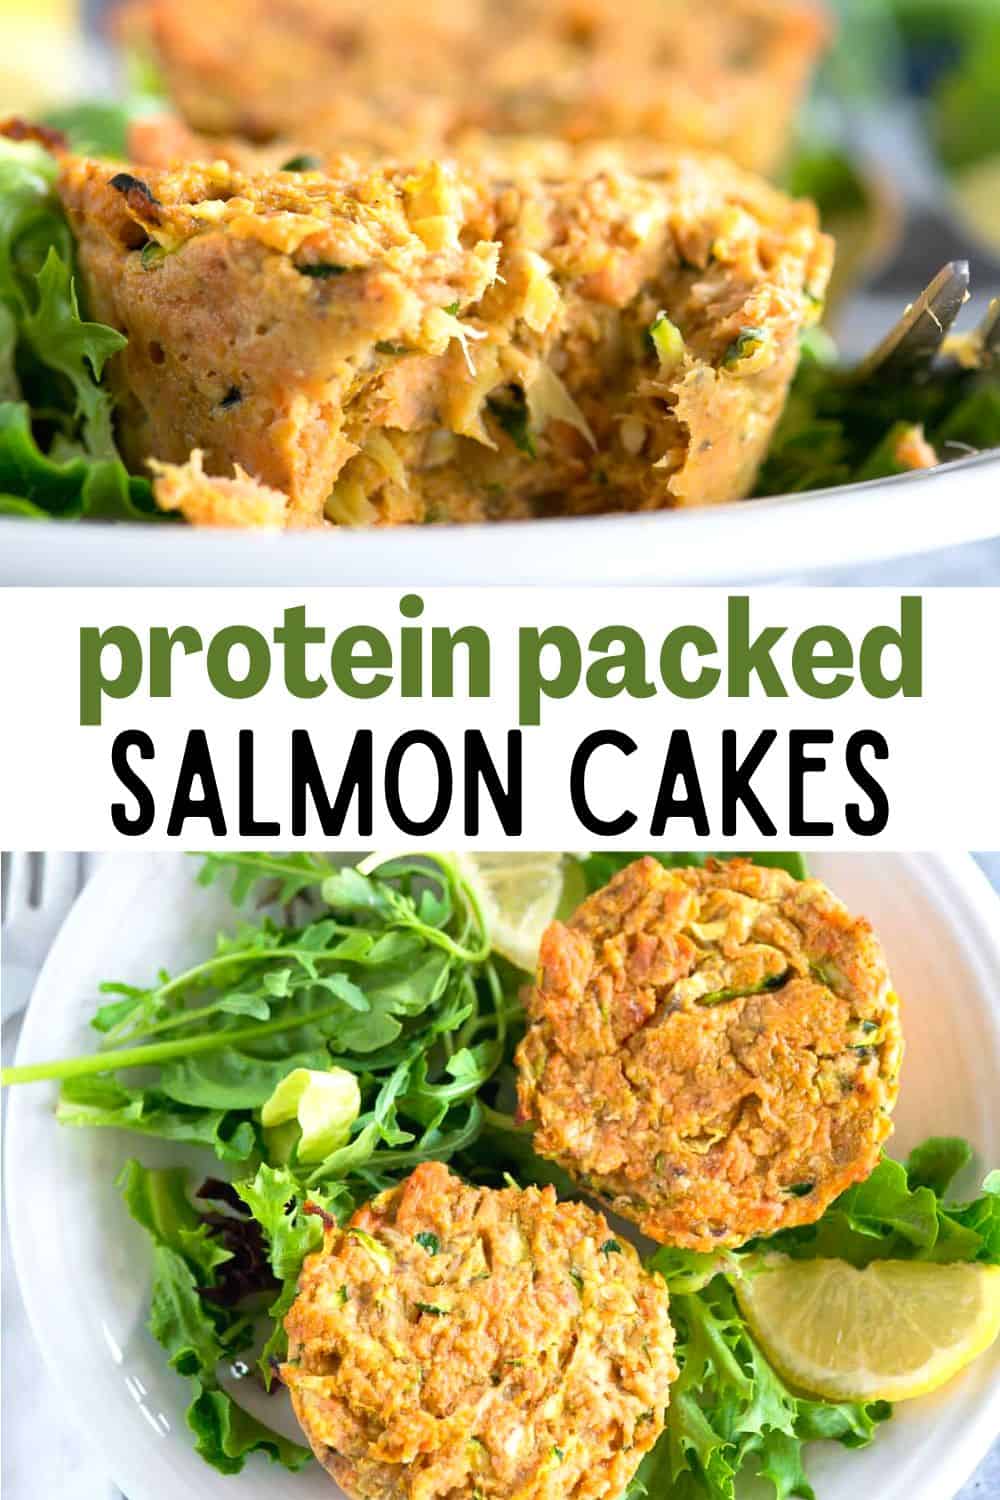 Light and delicious salmon cakes can be made in less than 30 minutes using canned salmon and just a few other simple ingredients. These protein packed patties are an easy nutrient rich meal!